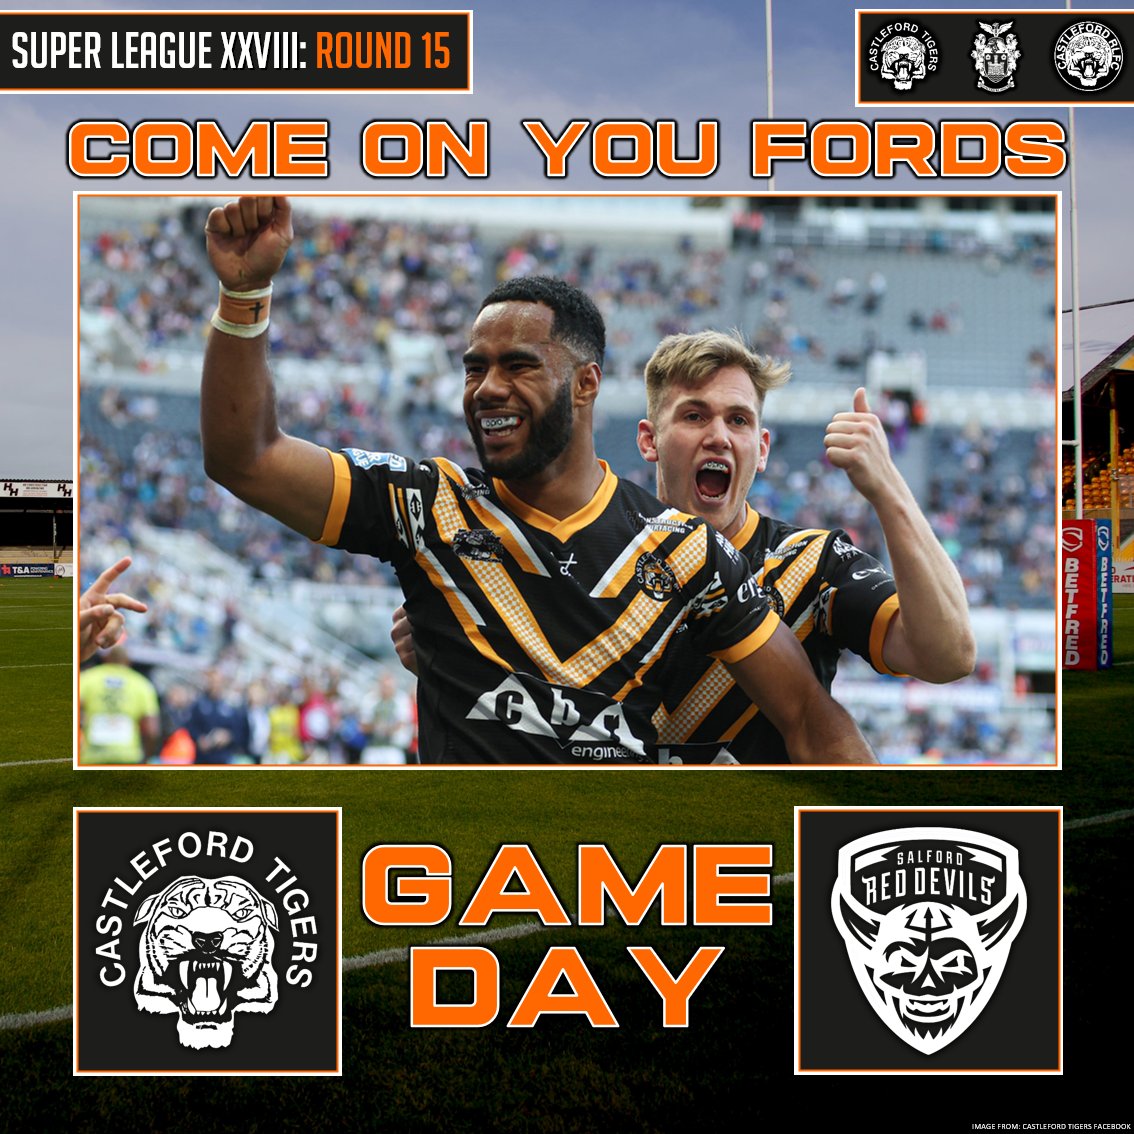 IT'S GAME DAY!!!

COME
ON
YOU 
FORDS!!!

#COYF #SLCasSal #superleague